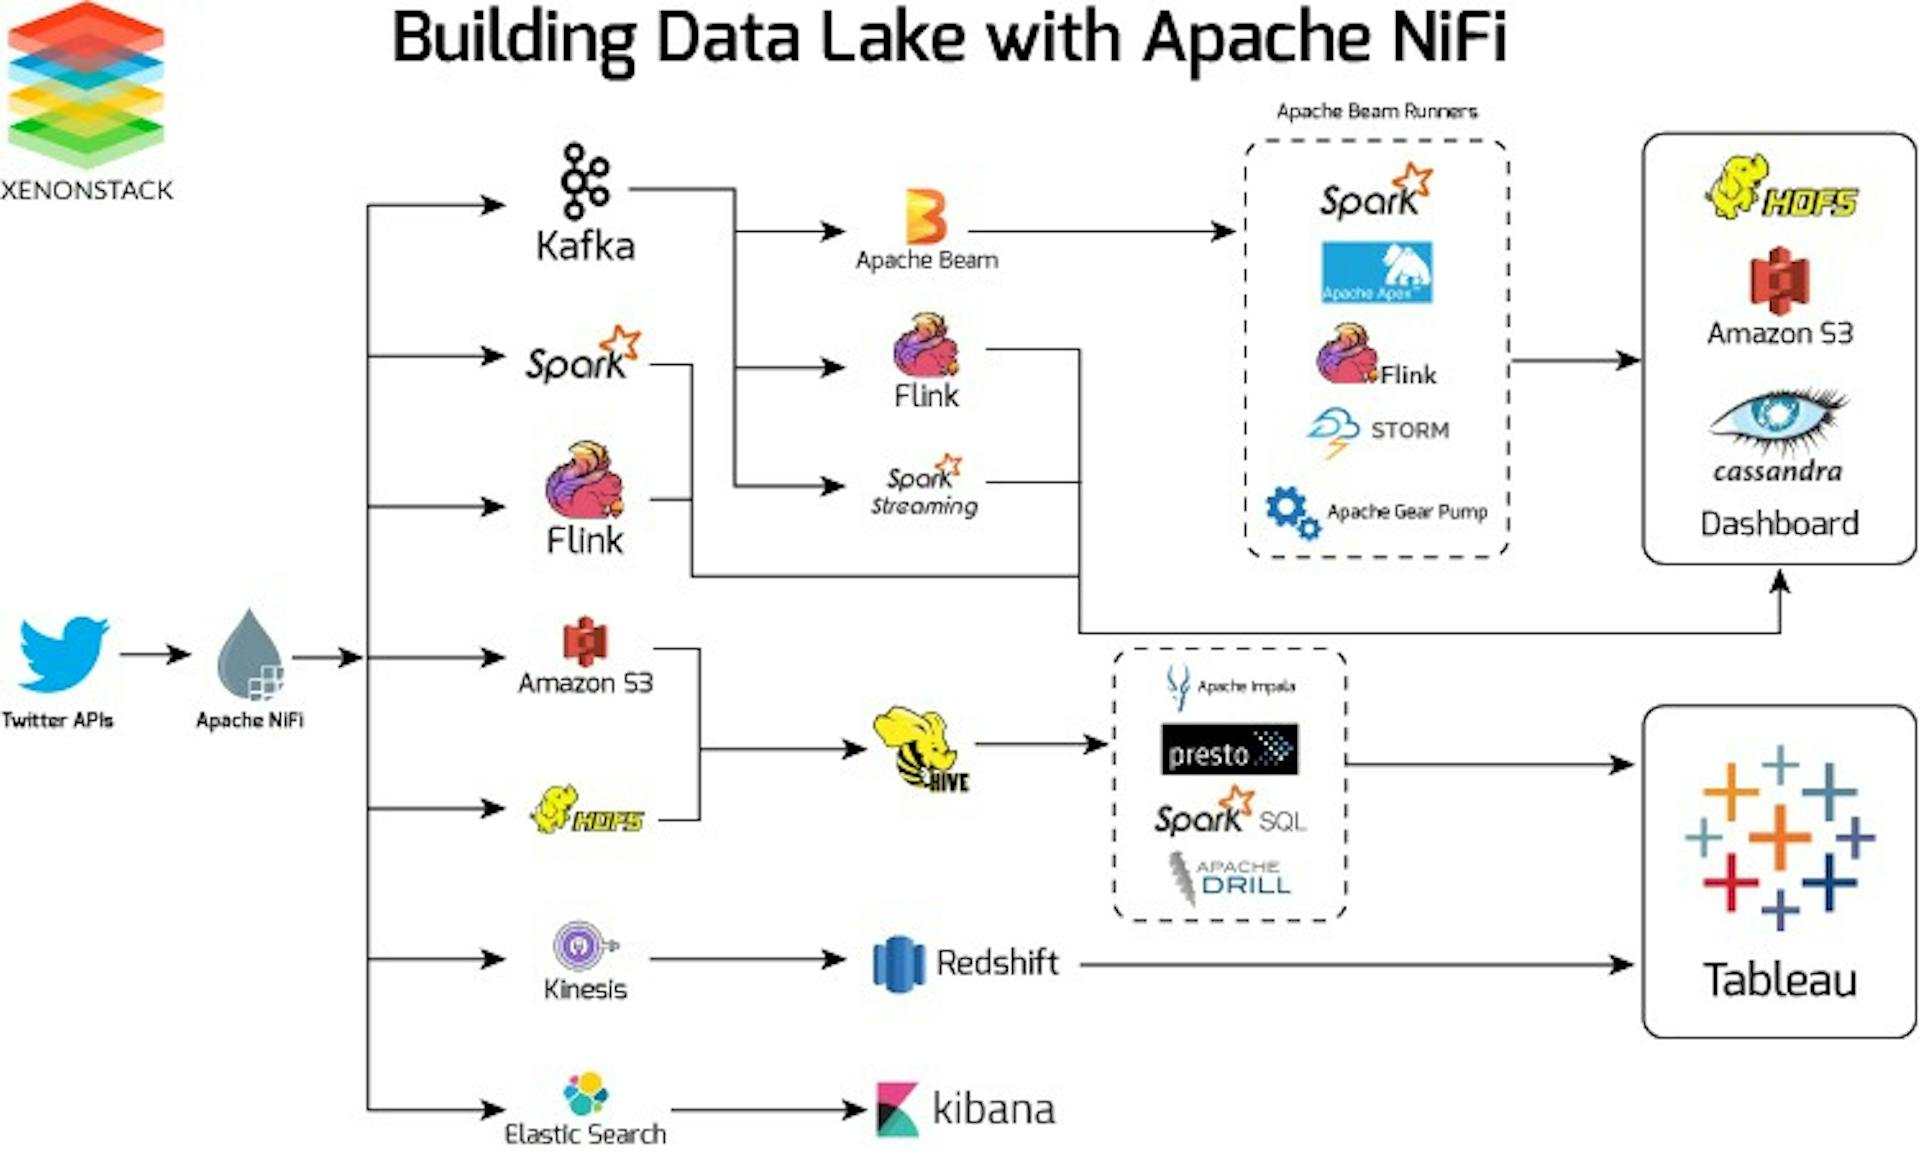 featured image - Data Ingestion Using Apache Nifi For Building Data Lake Using Twitter Data